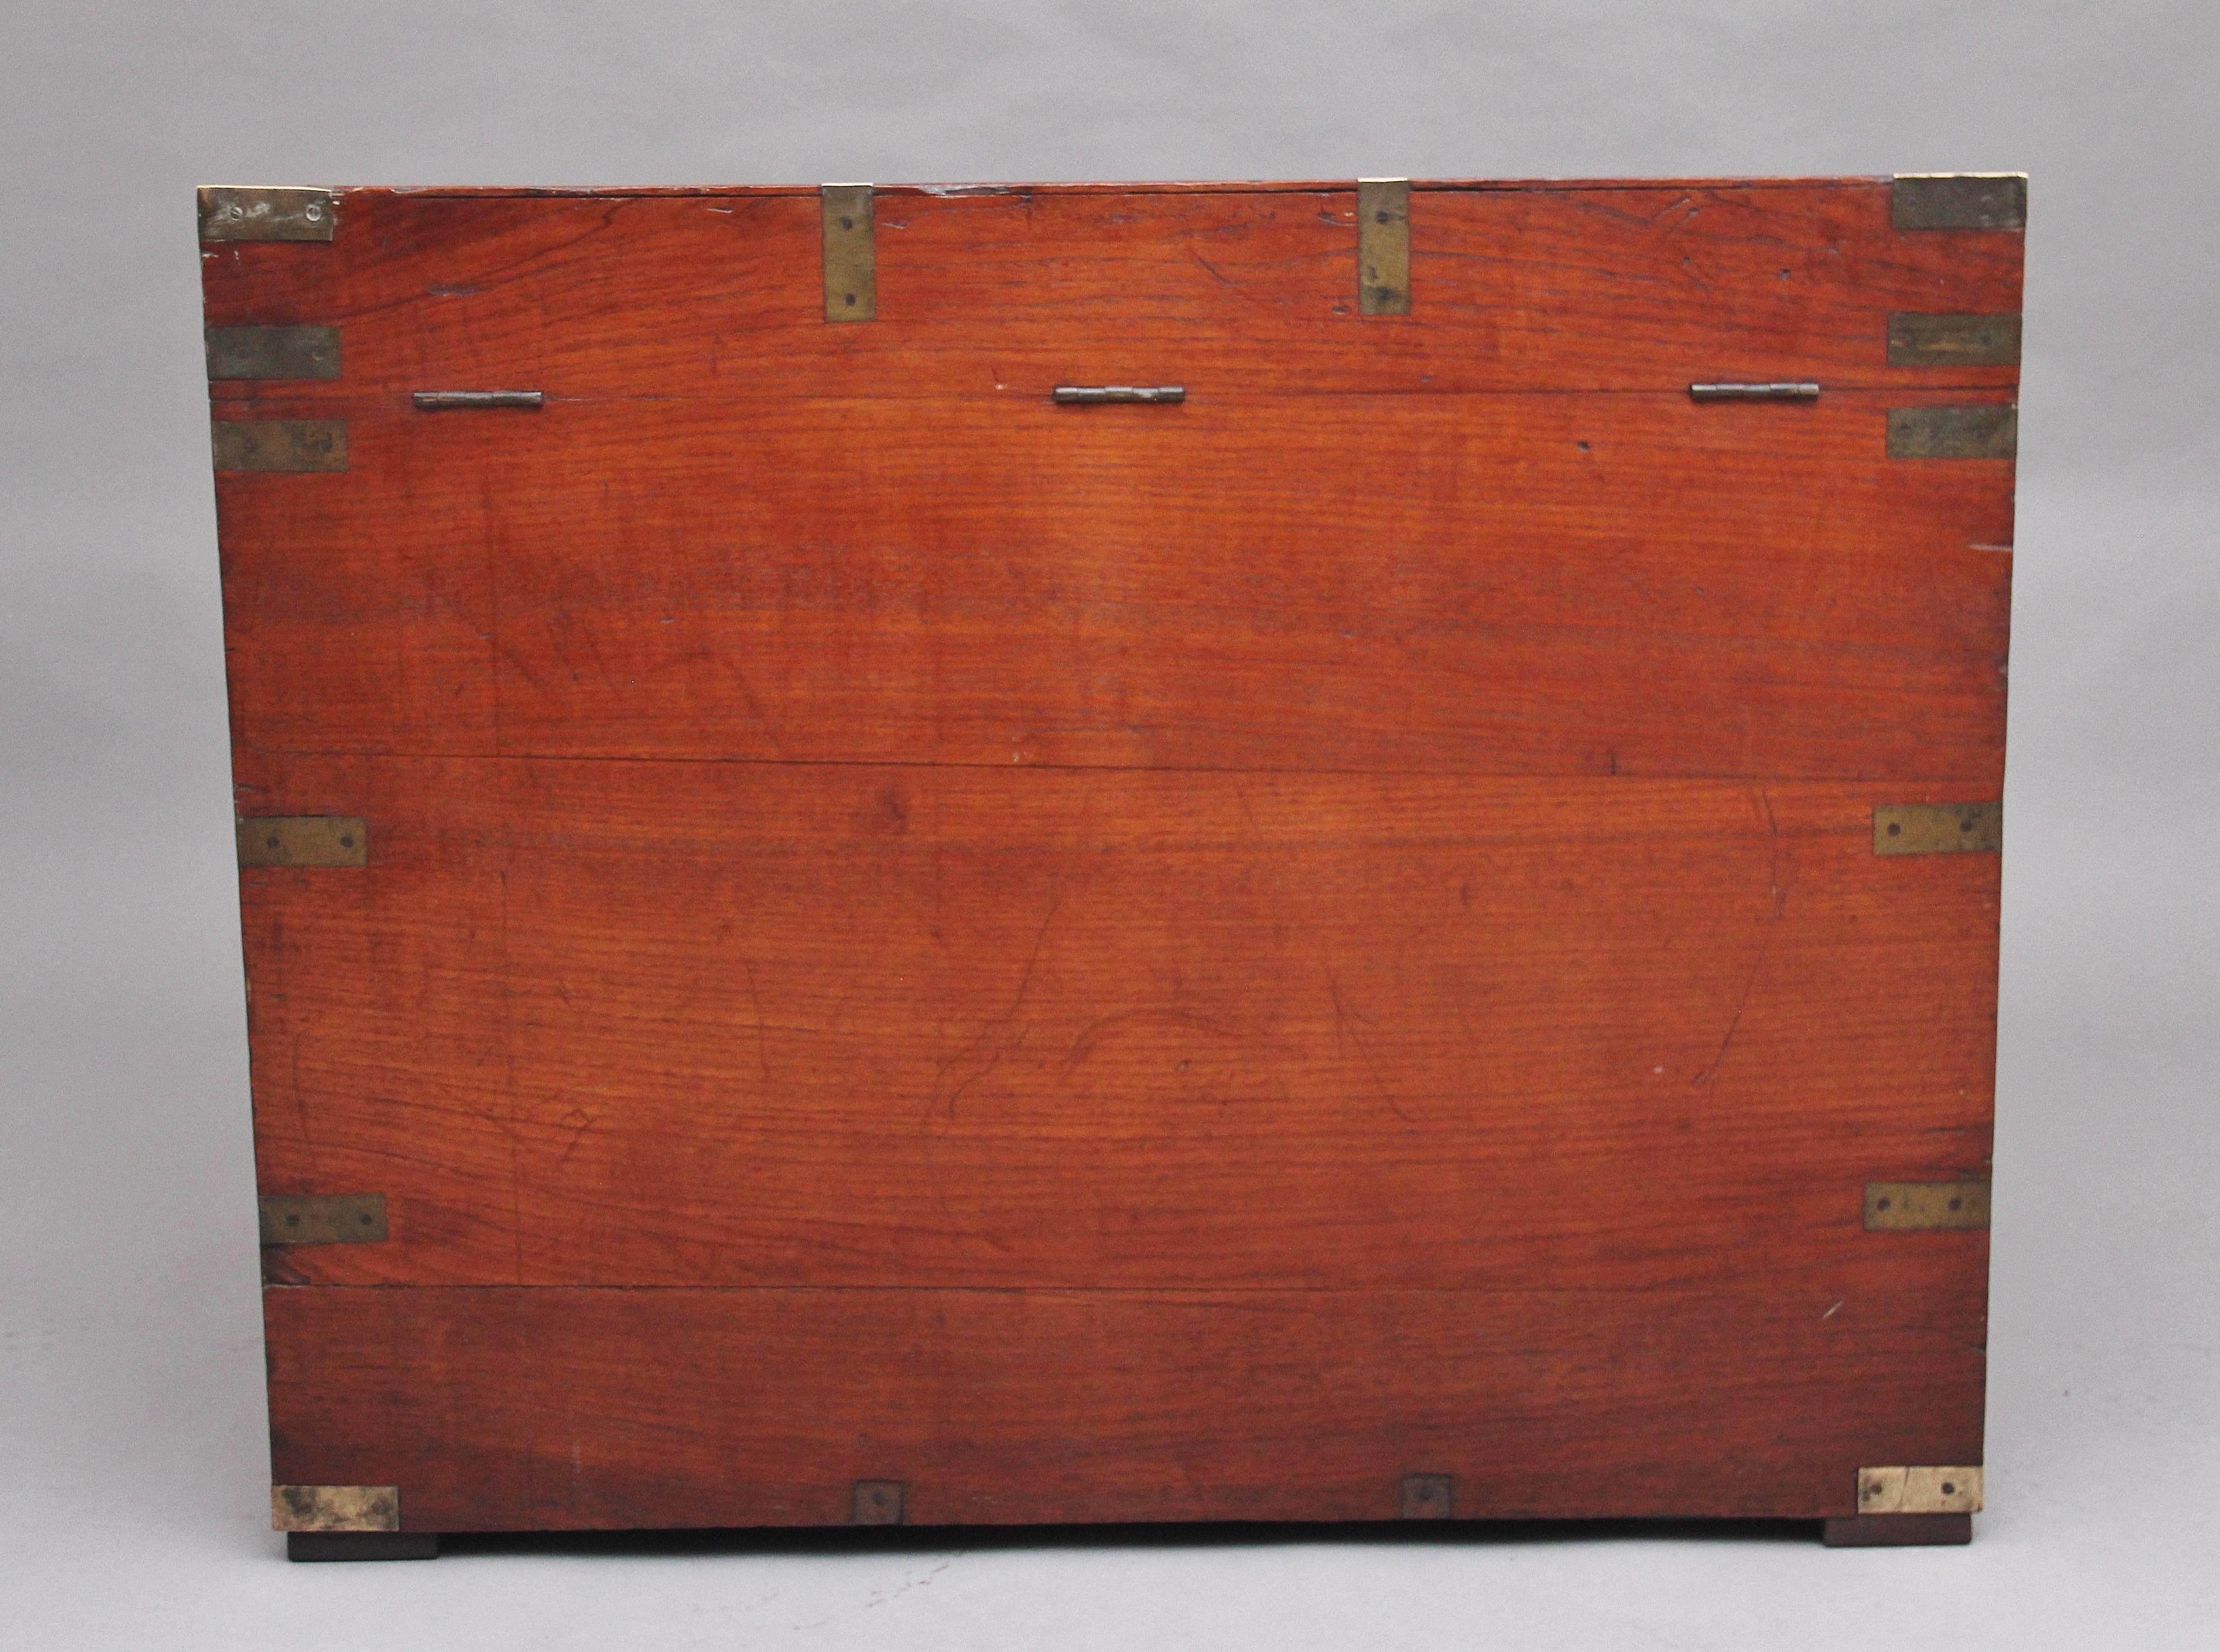 19th Century Teak and Brass Bound Campaign Trunk 1